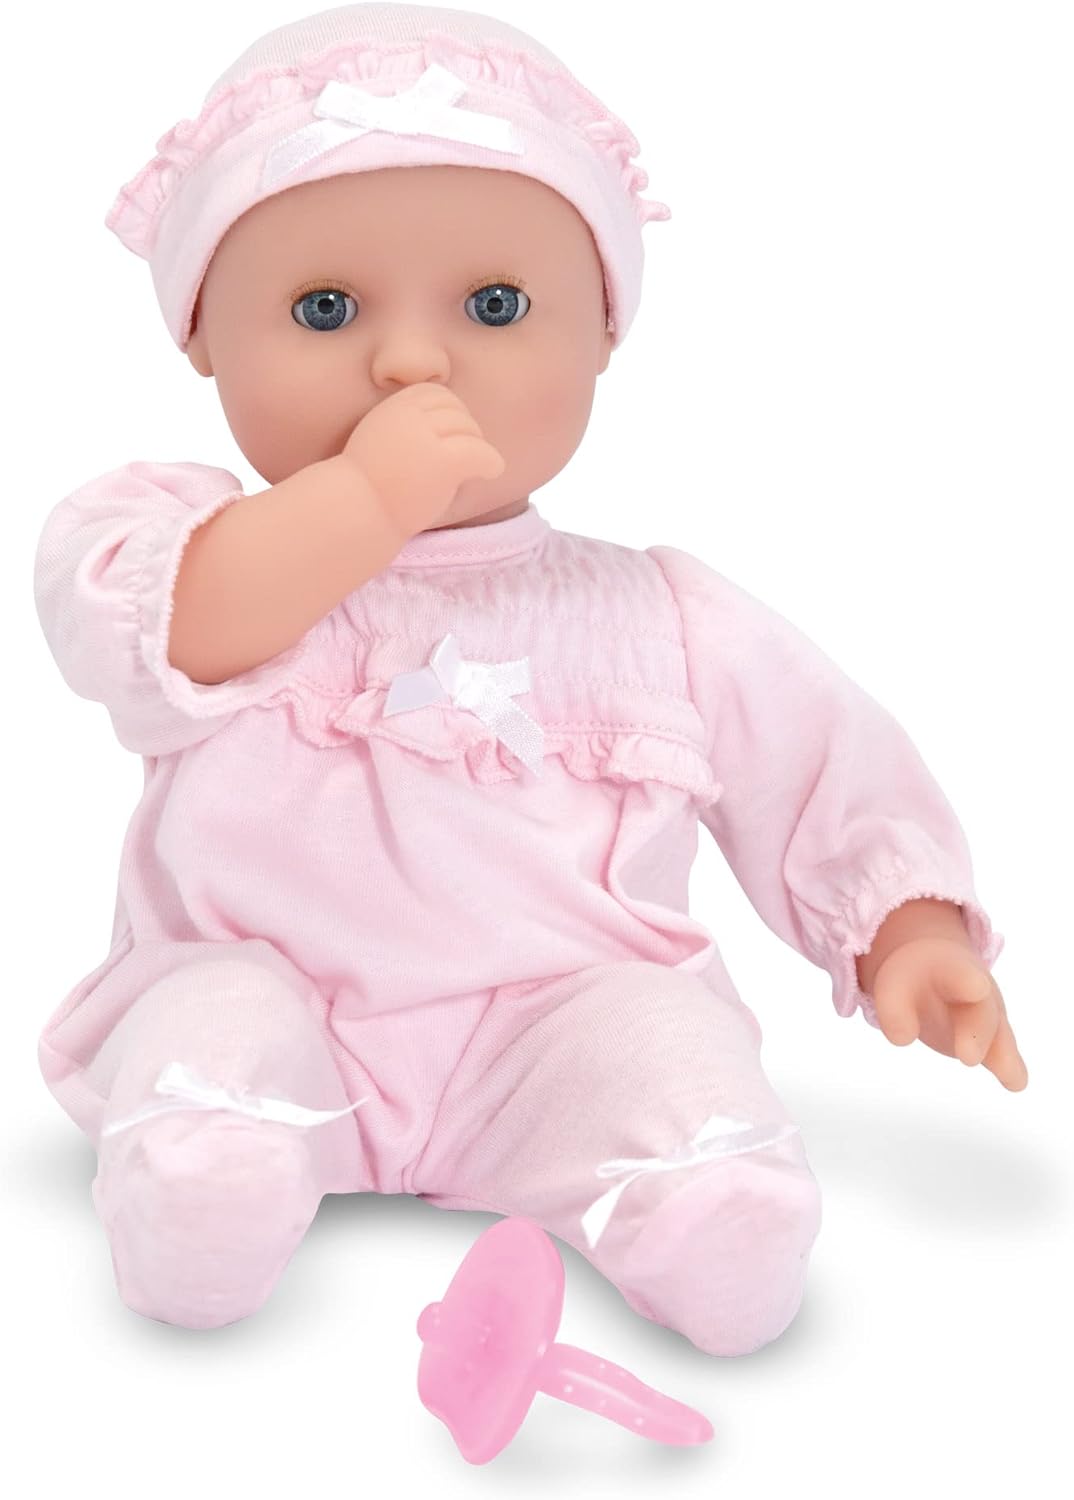 Melissa & Doug Mine to Love Jenna 12-Inch Soft Body Baby Doll (Frustration-Free Packaging, Great Gift for Girls and Boys – Best for Babies, 18/ 24 Month Olds, 1 and 2 Year Olds))